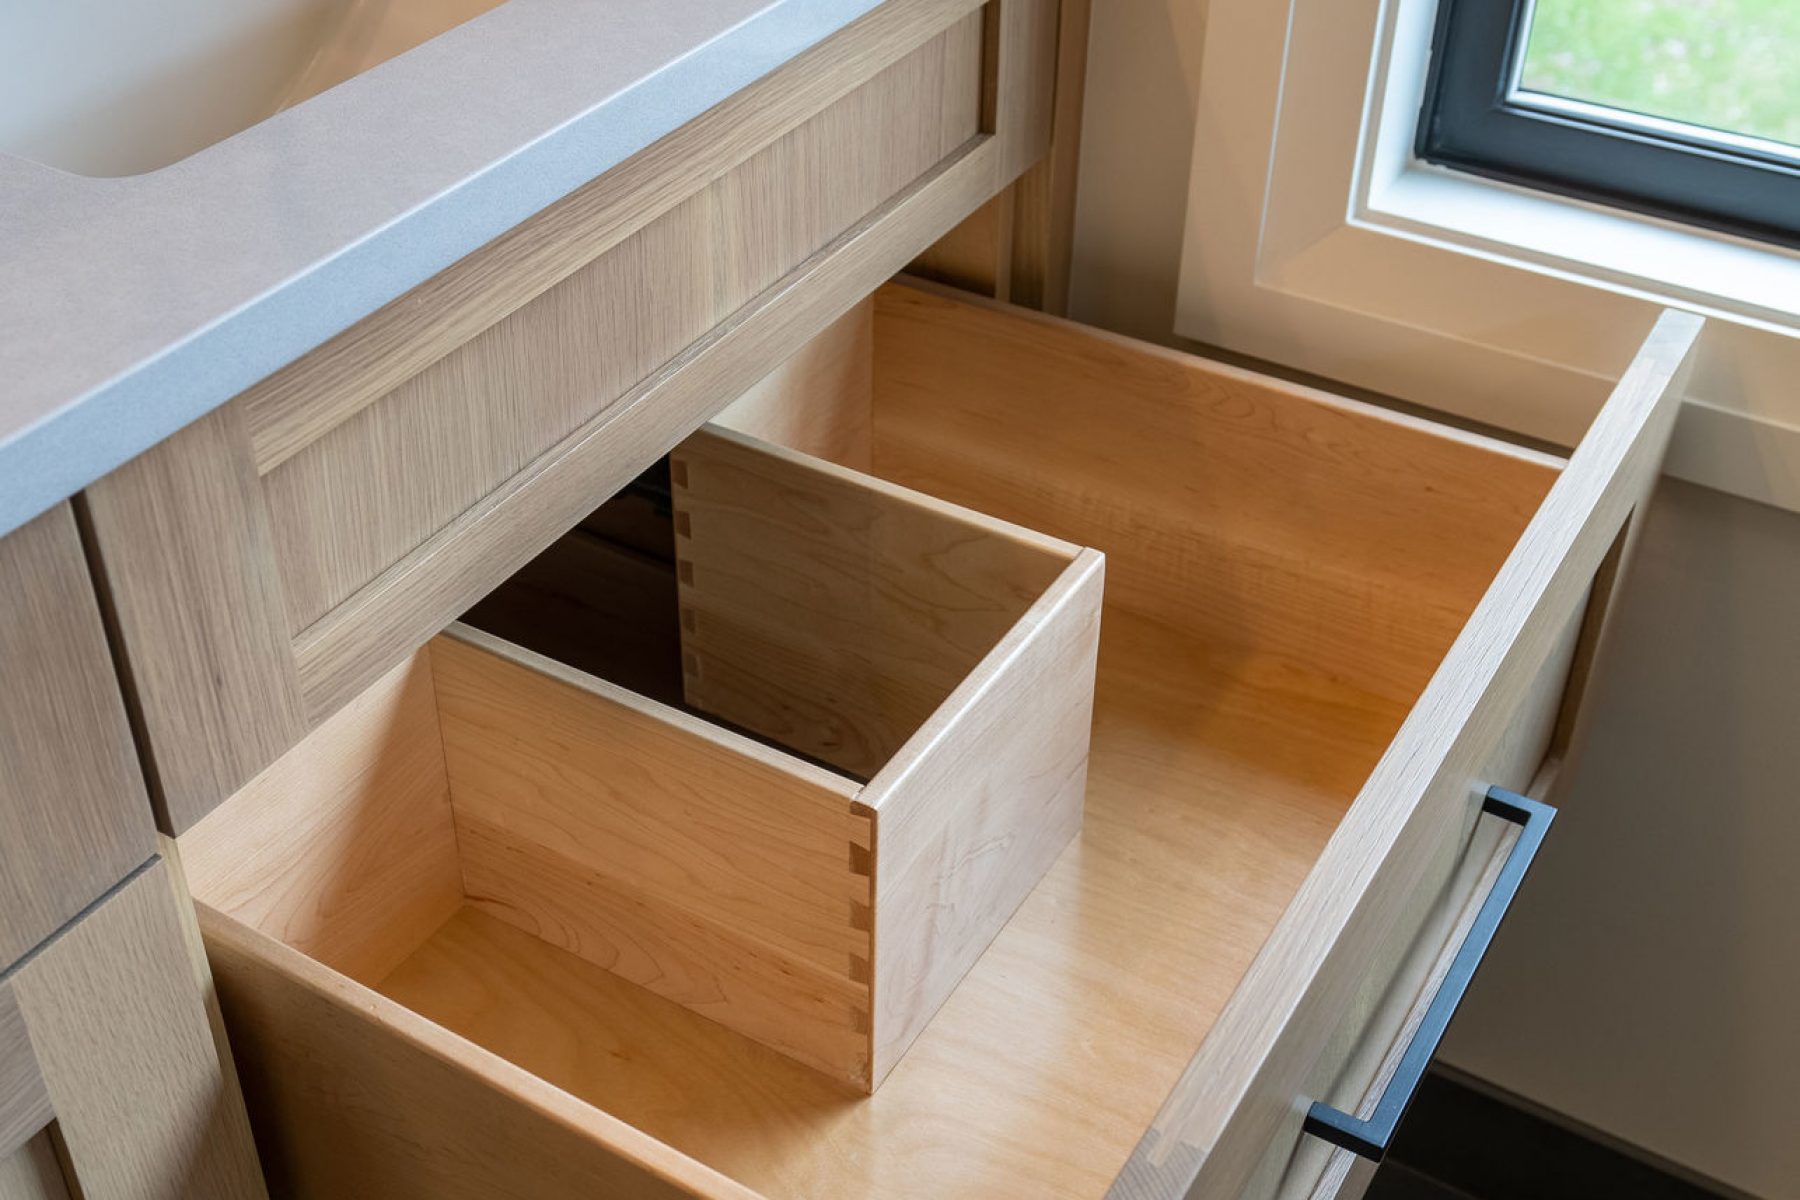 sink with drawer